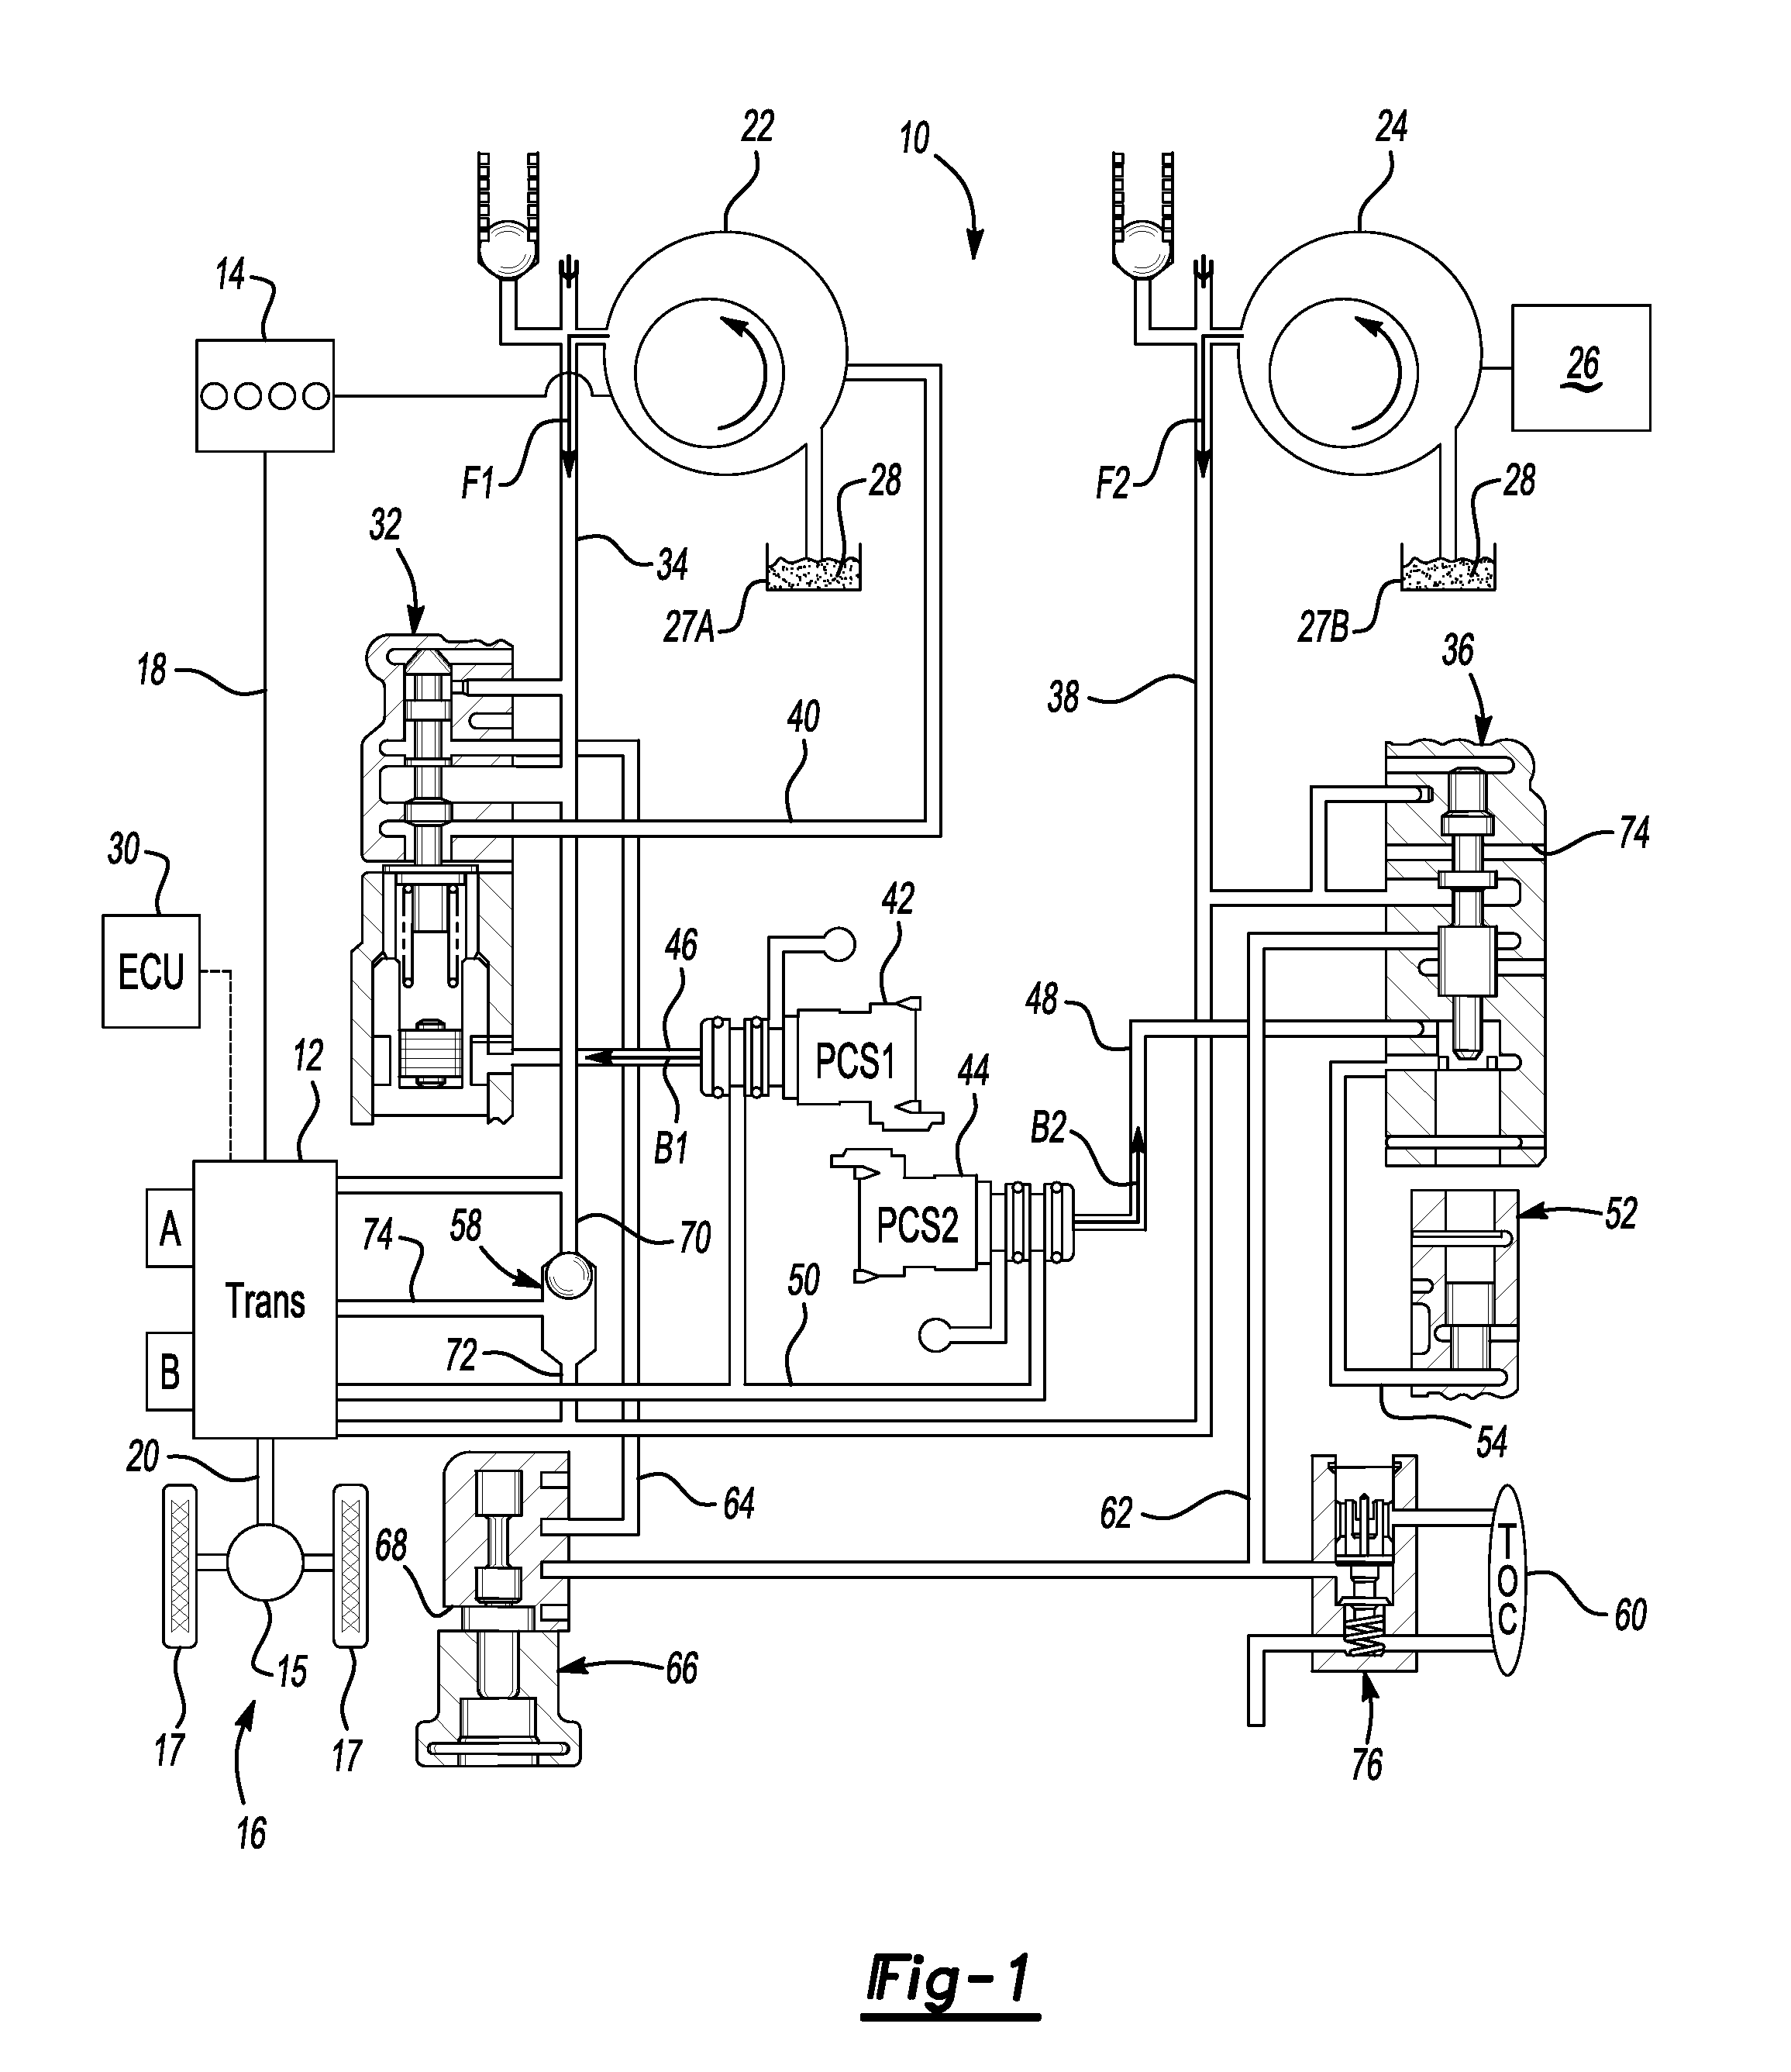 Hydraulic control system for multi-mode hybrid transmission and method of regulating the same